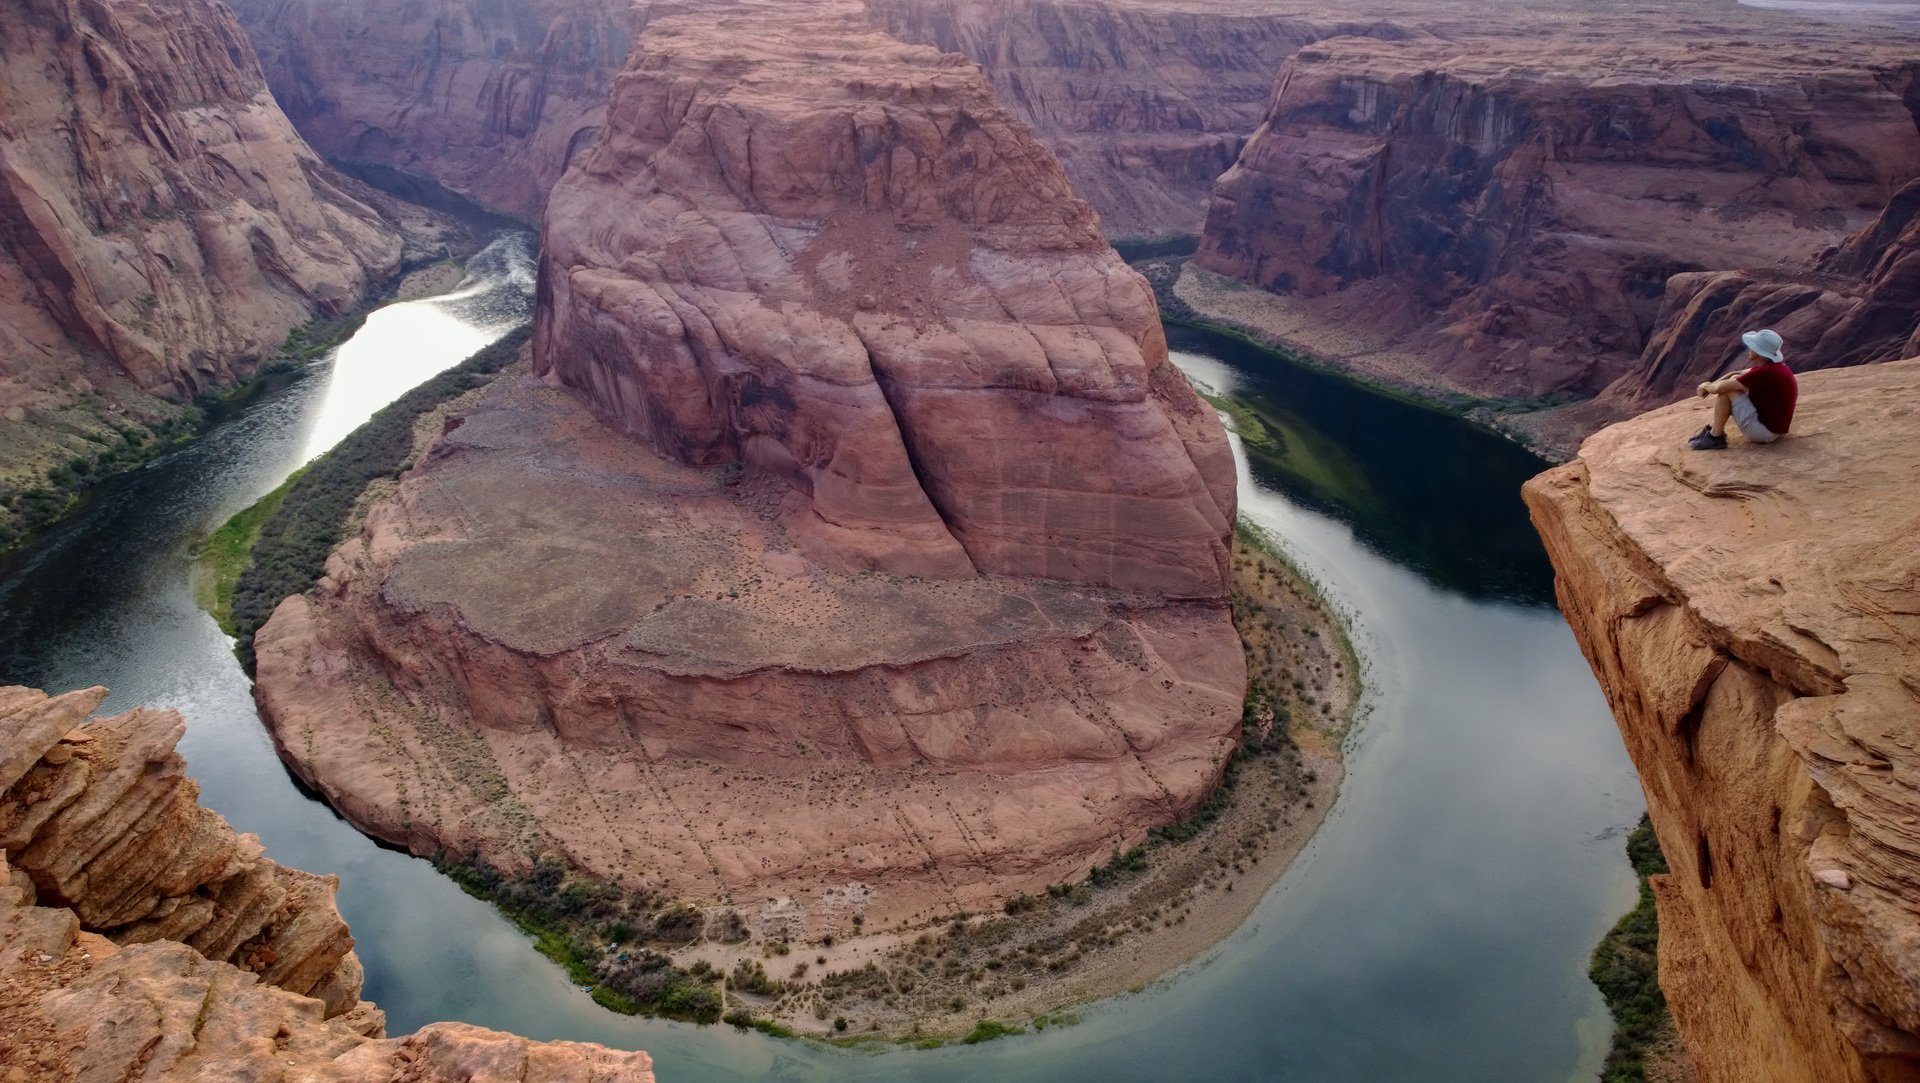 John Burcham looks at Horshoe Bend of the Colorado River south of Page, AZ.